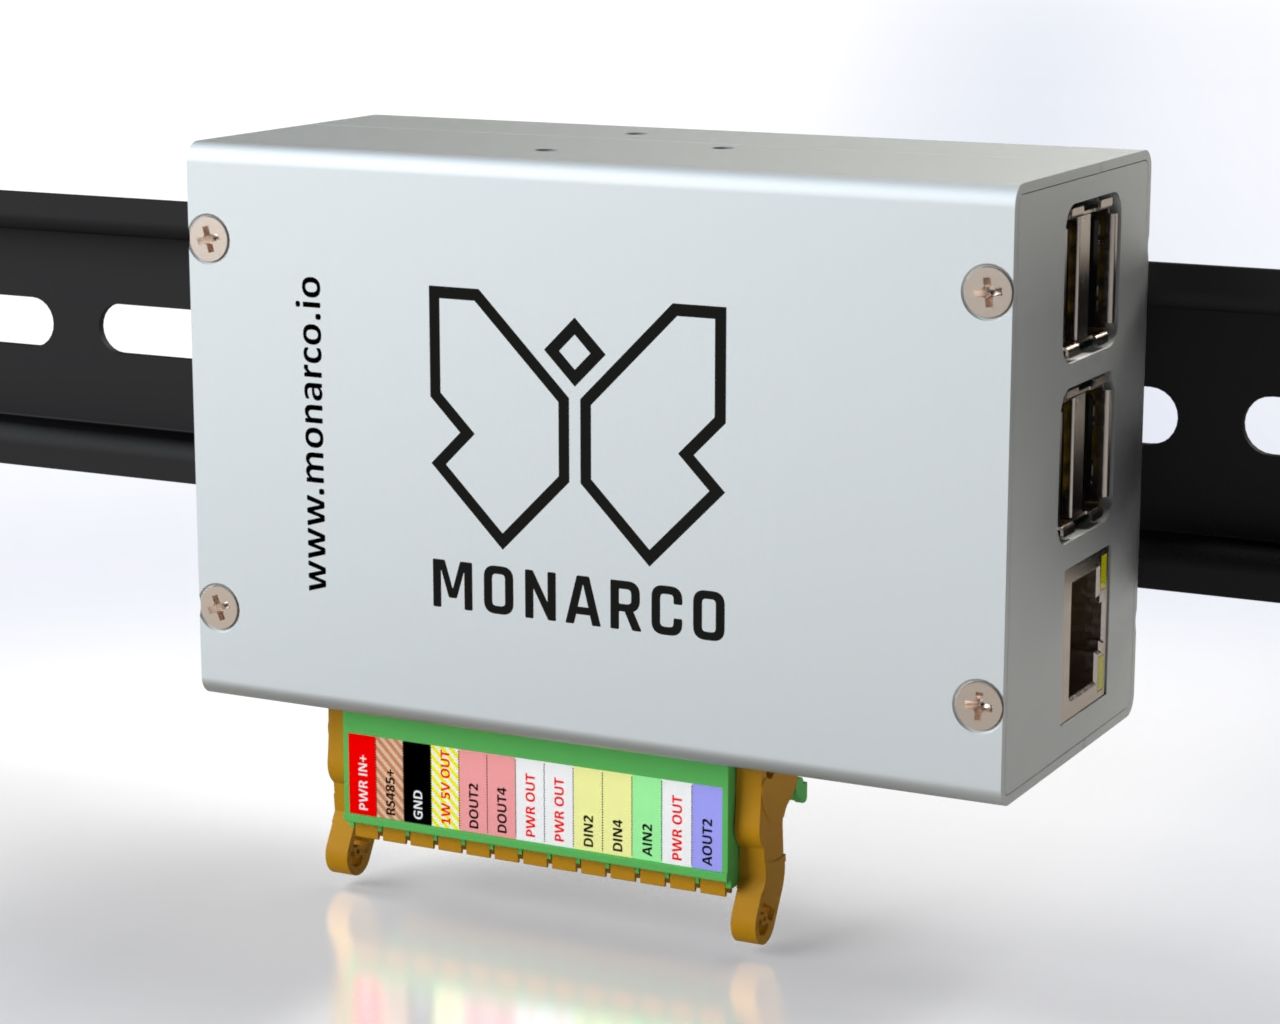 Monarco HAT and Raspberry Pi on a DIN rail - horizontal mounting.